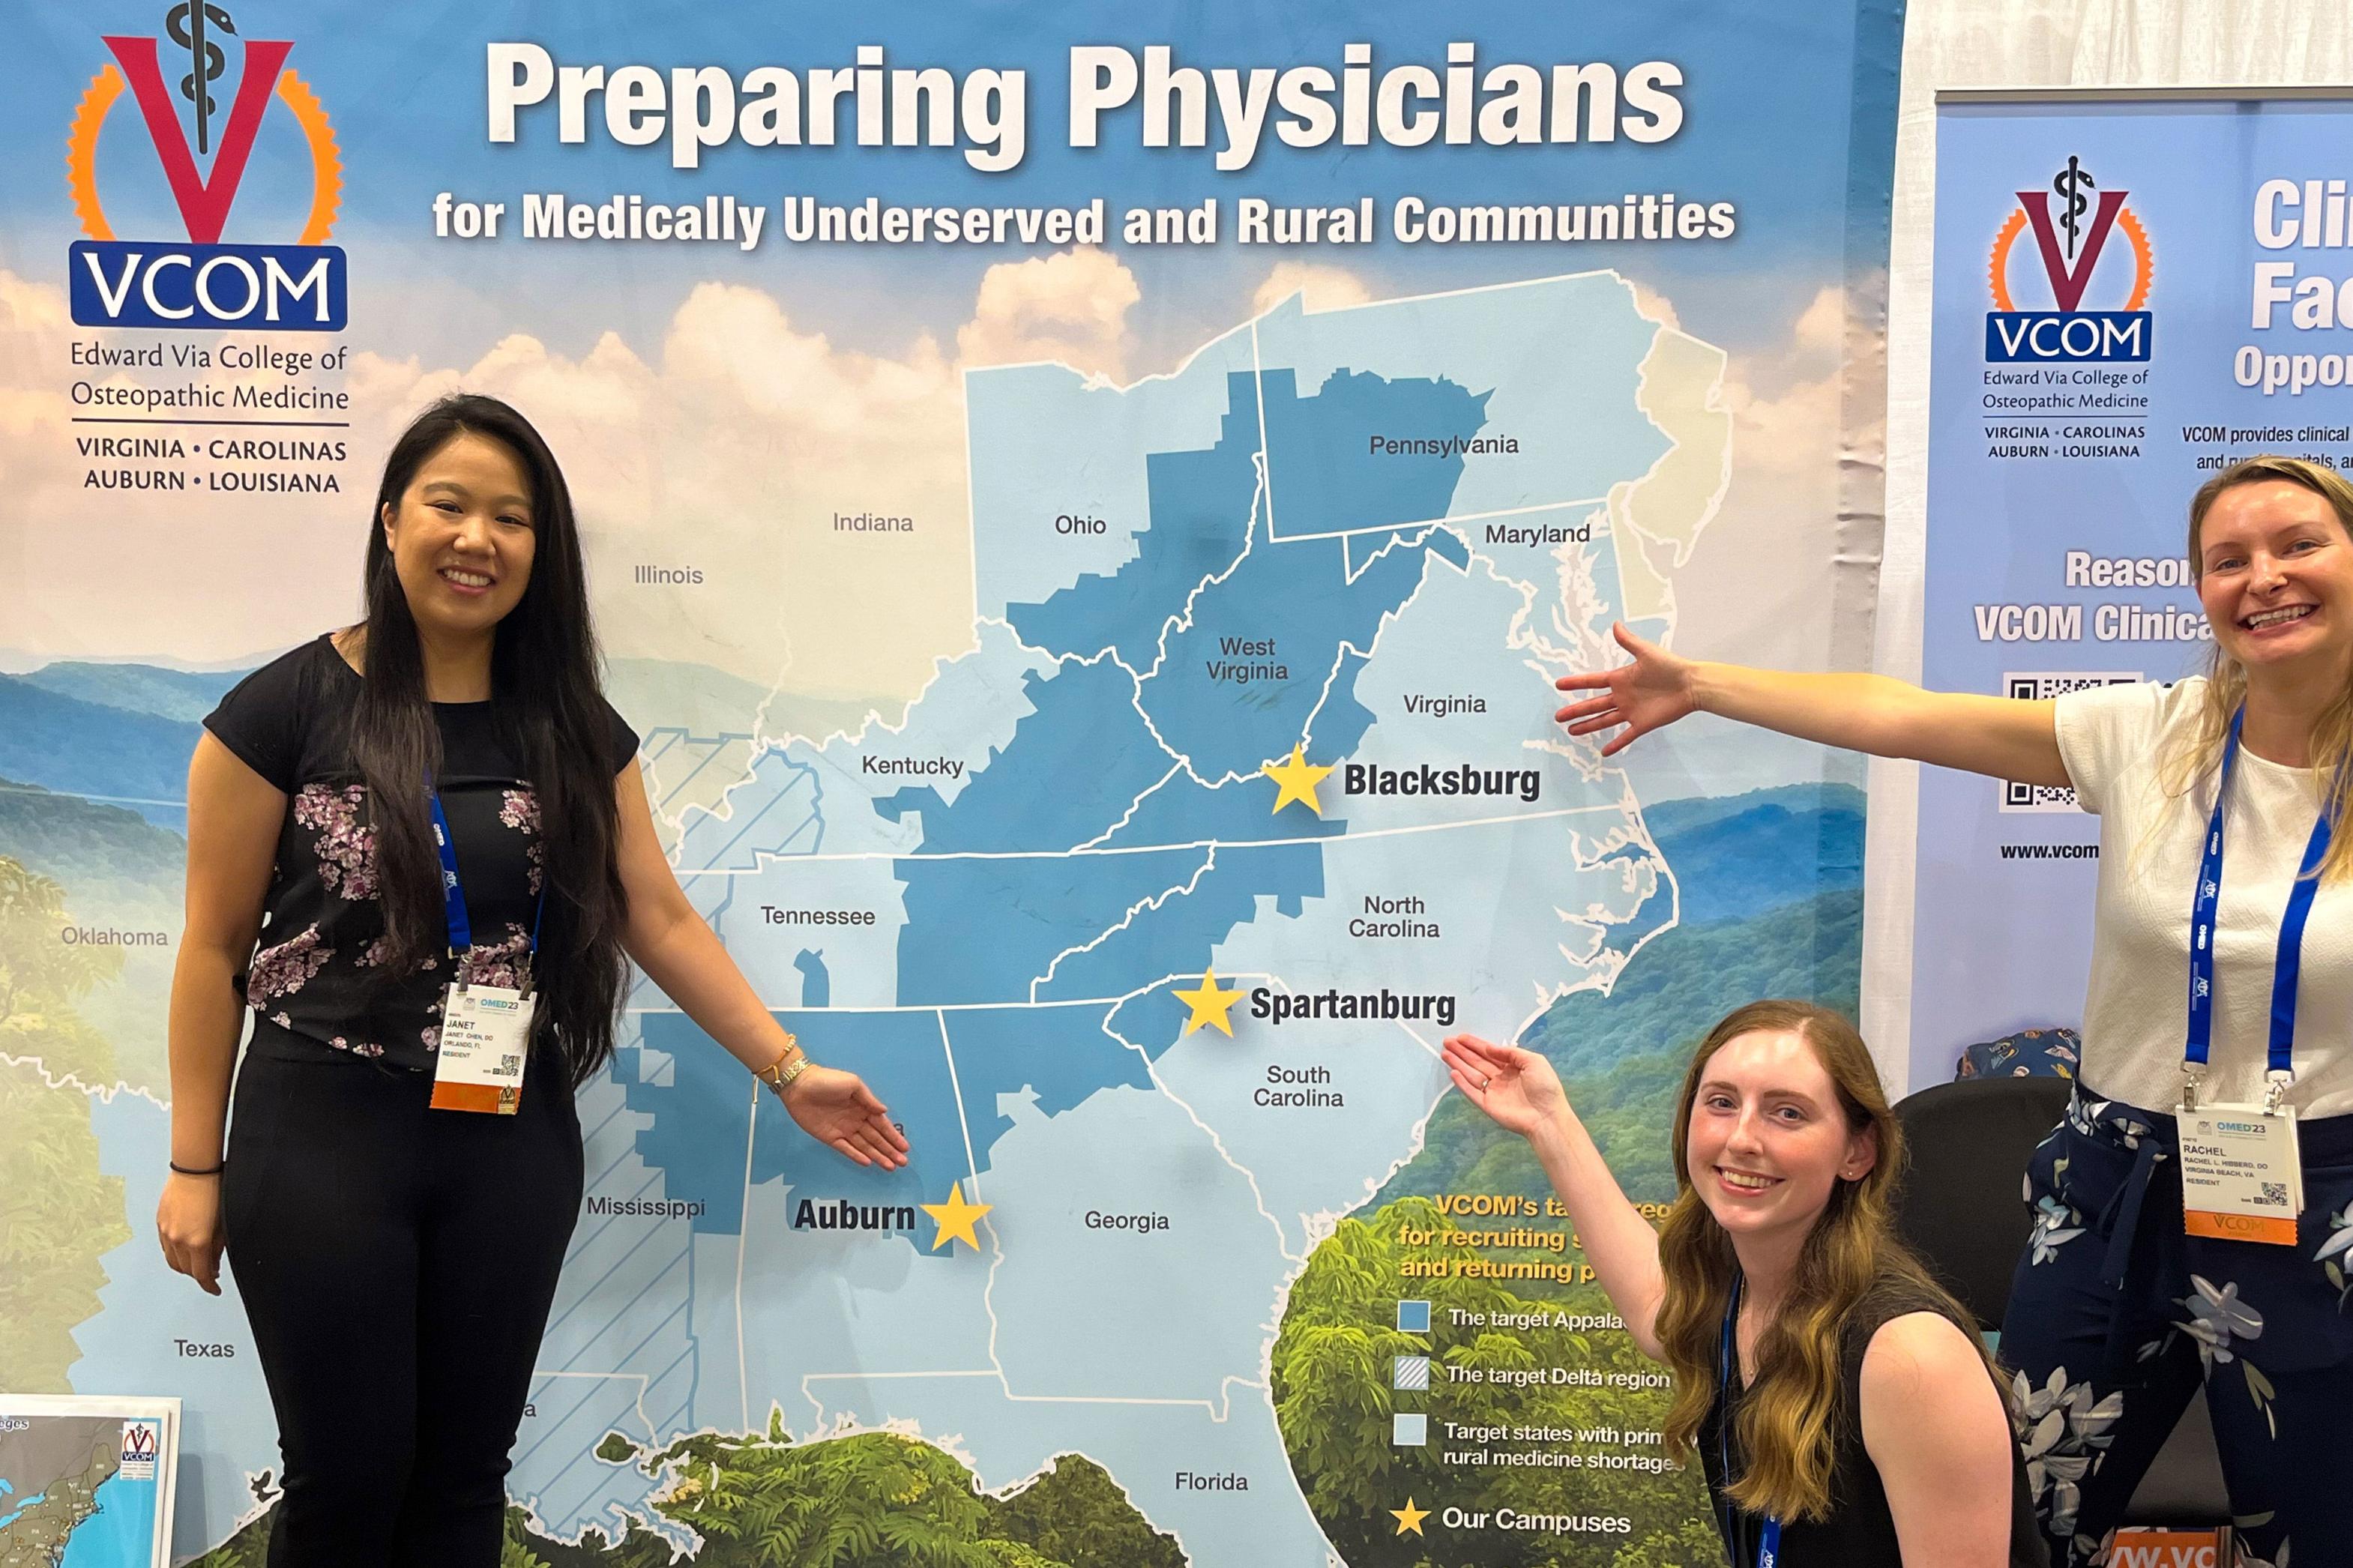 VCOM students posing in front of a map of VCOM medical school locations